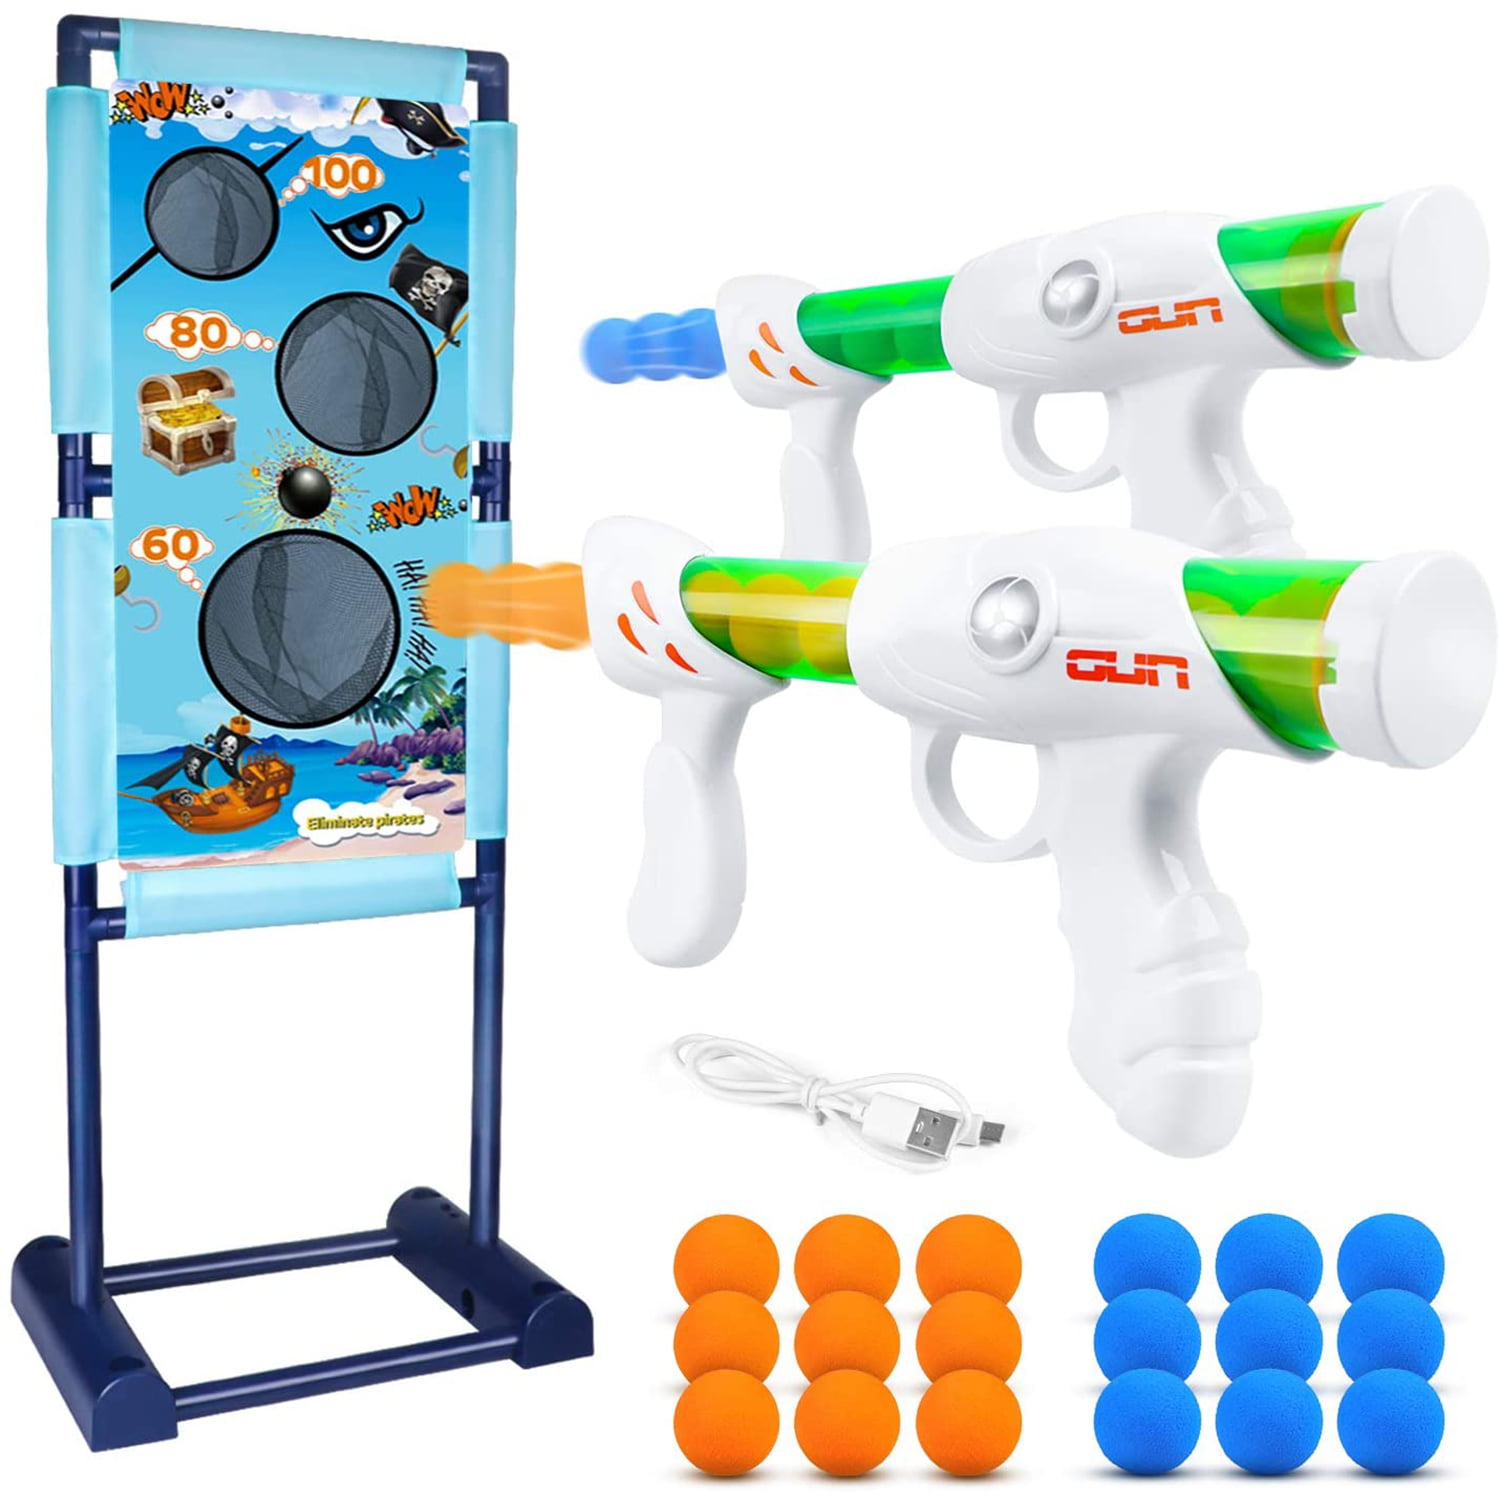 2in1 Toy Gun Soft Bullet Water Crystal Pistol Gift Kids Shooting Game Set Rubber for sale online 